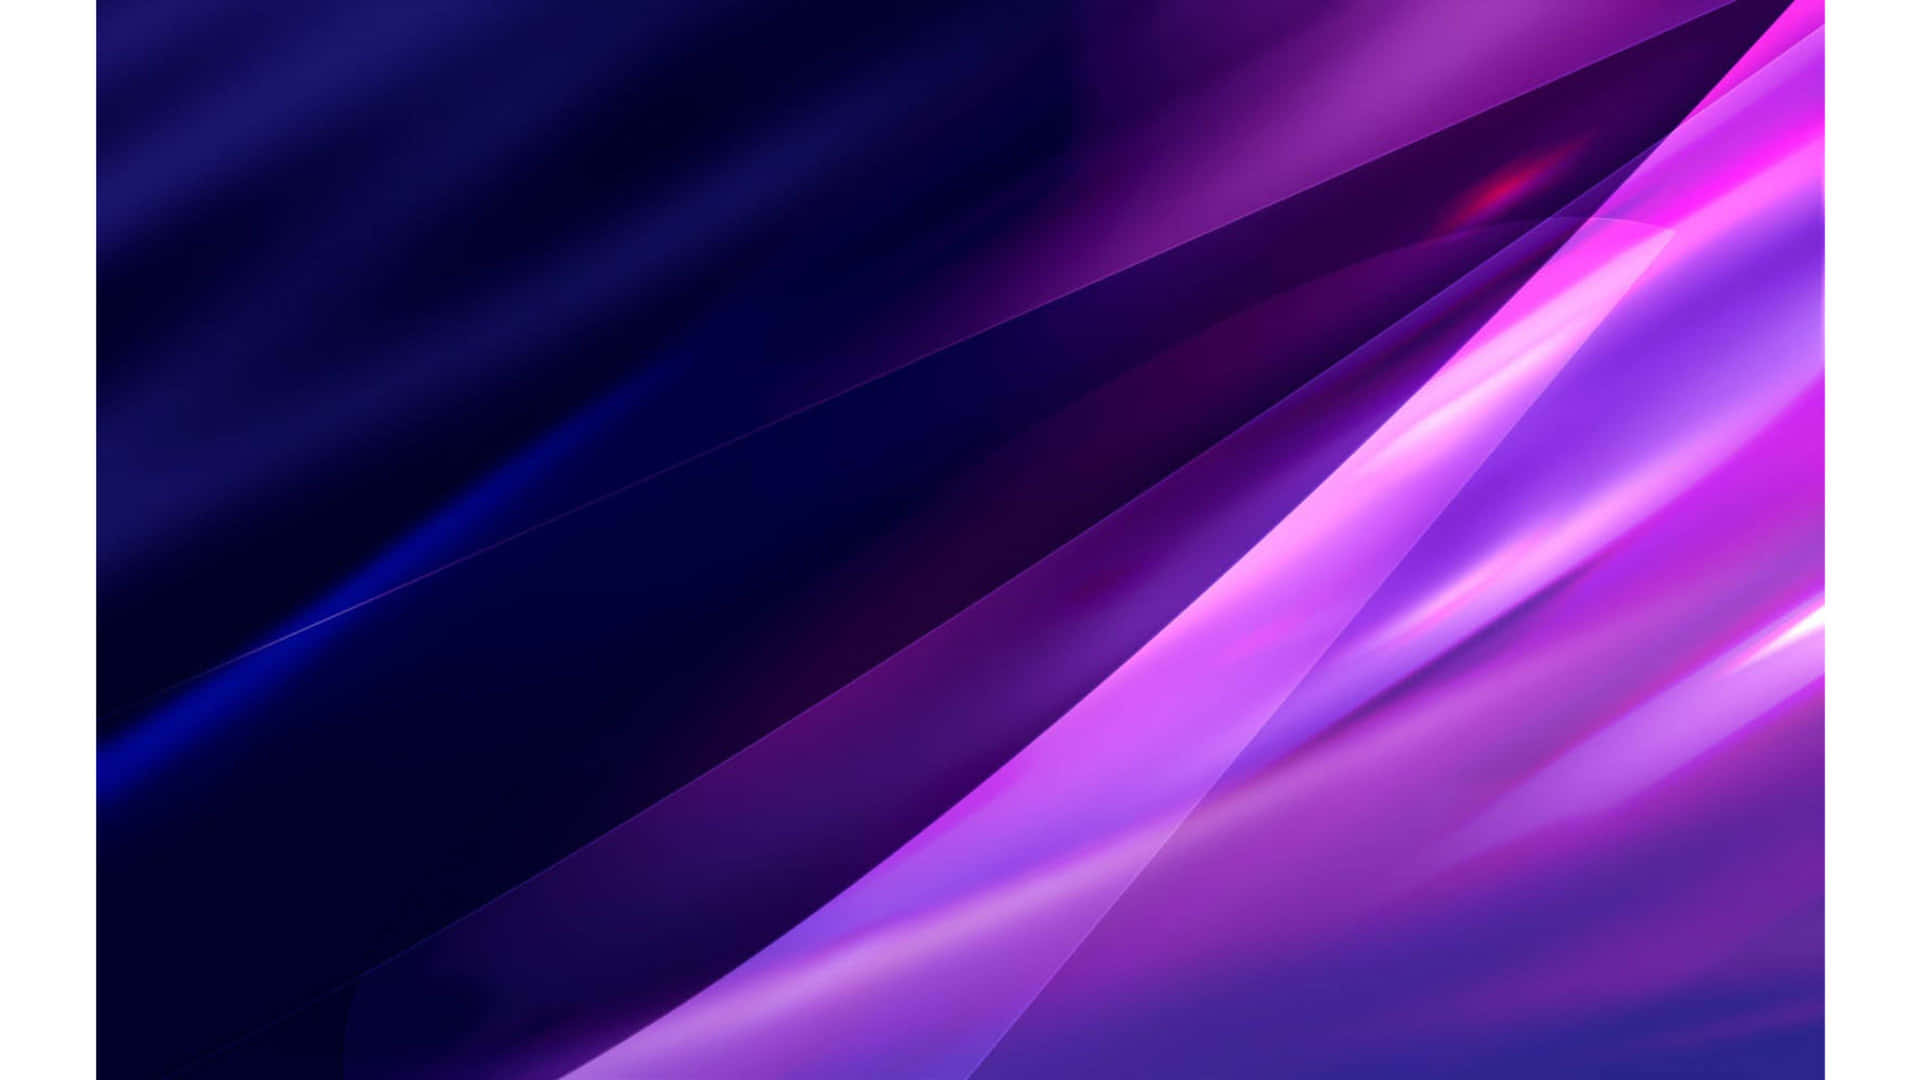 Image  Colorful Abstract Purple And Blue Background